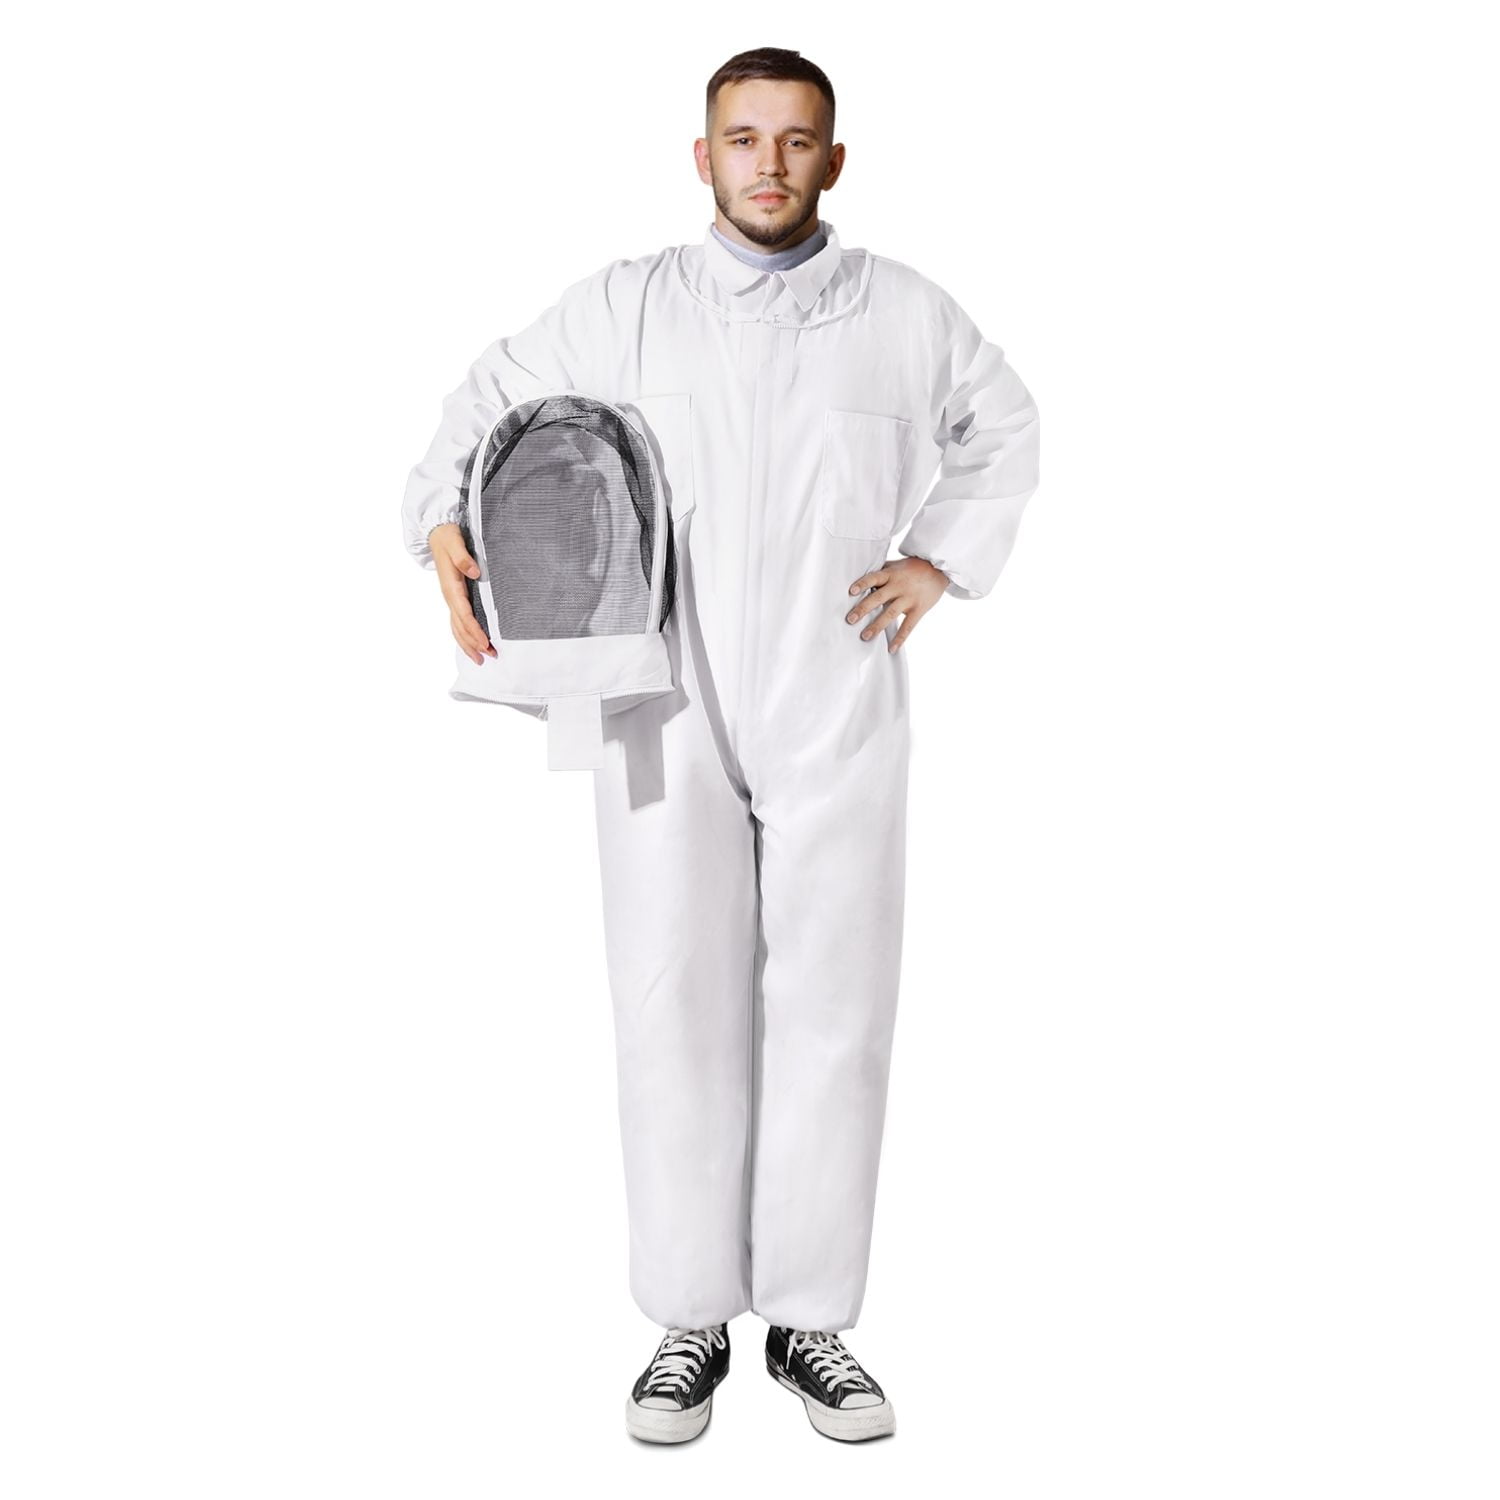 Bee Keeping Suit Adult  Bee Keeper Suit with Round Hood ZSTR-3XLarge 